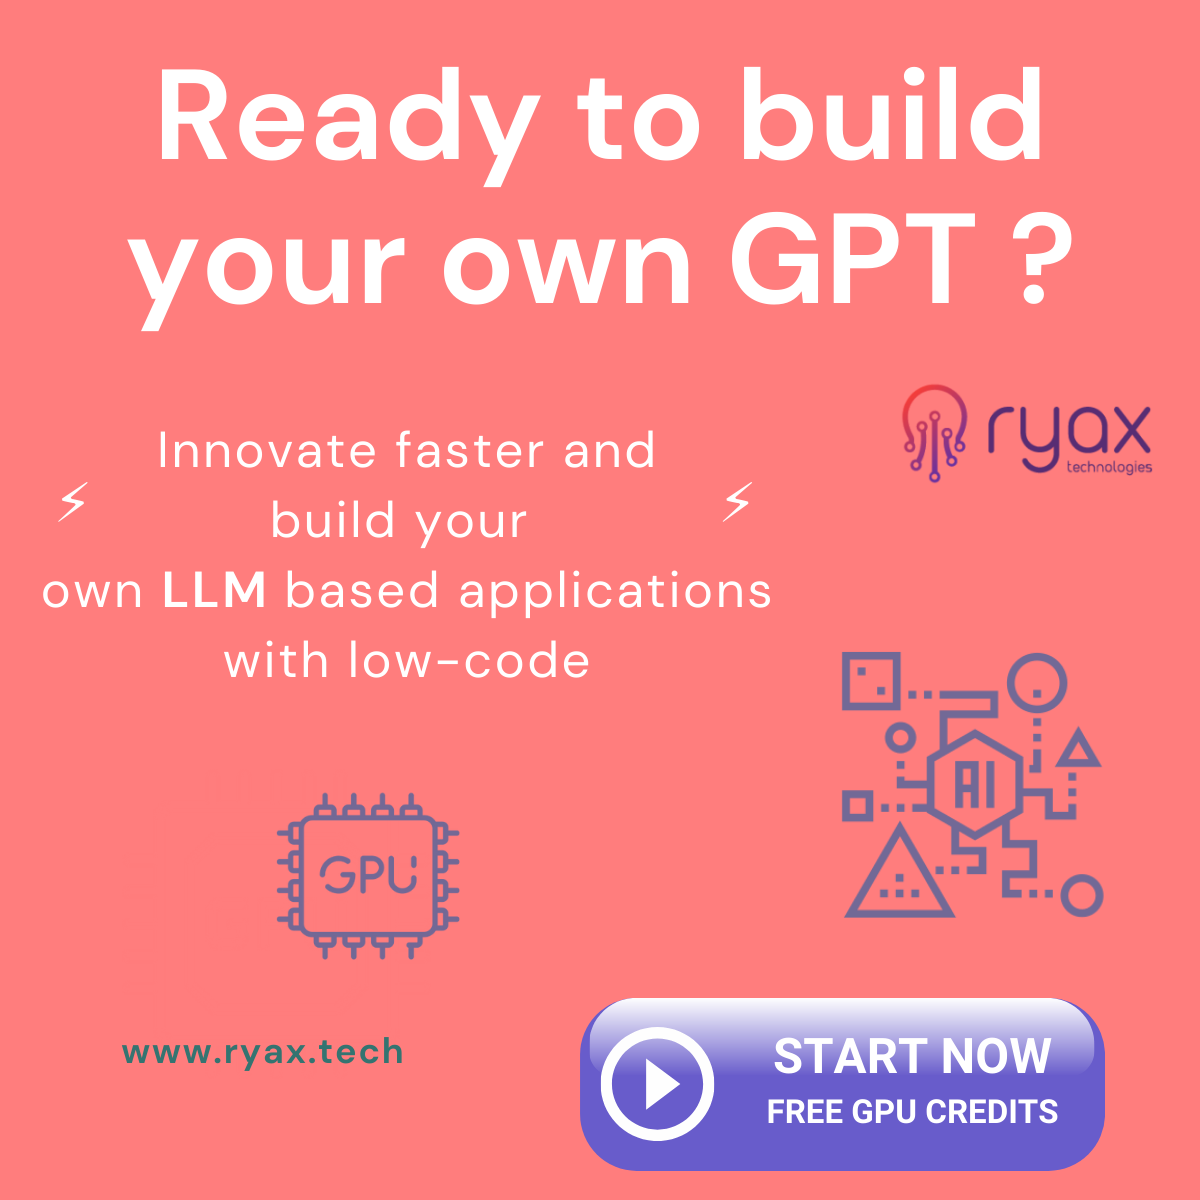 Ready to build your own GPT ? Innovate faster and build your own LLM based application with low-code